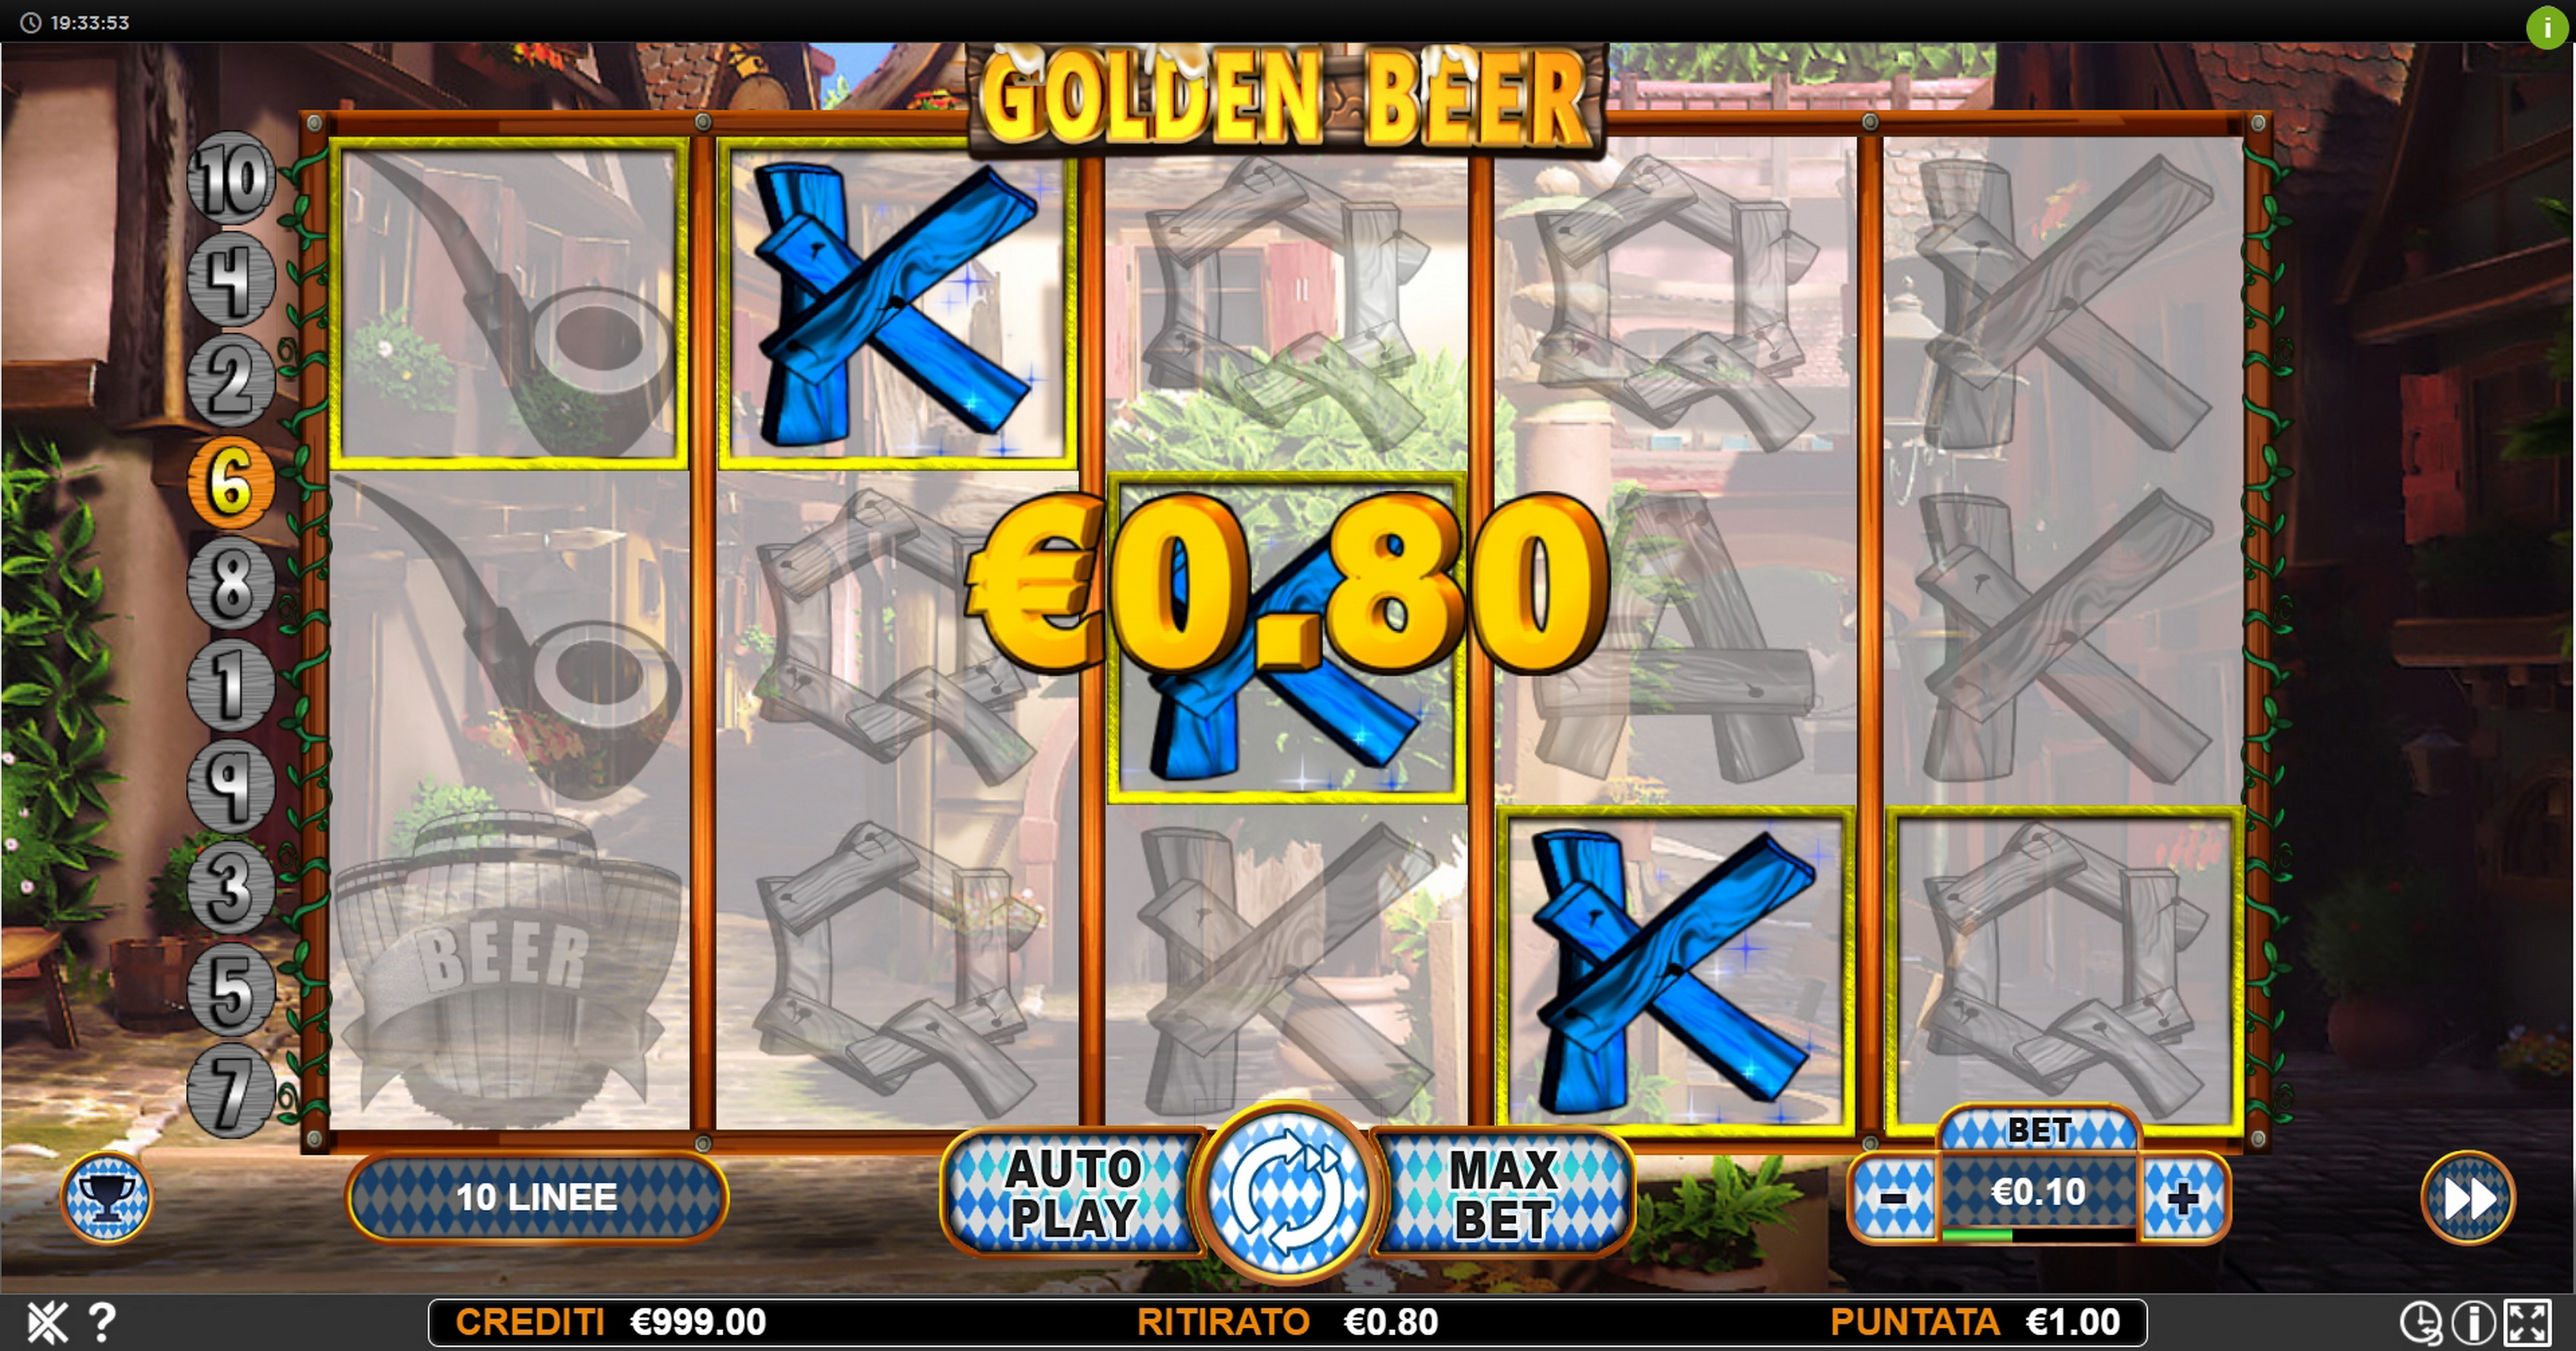 Win Money in Golden Beer Free Slot Game by Nazionale Elettronica